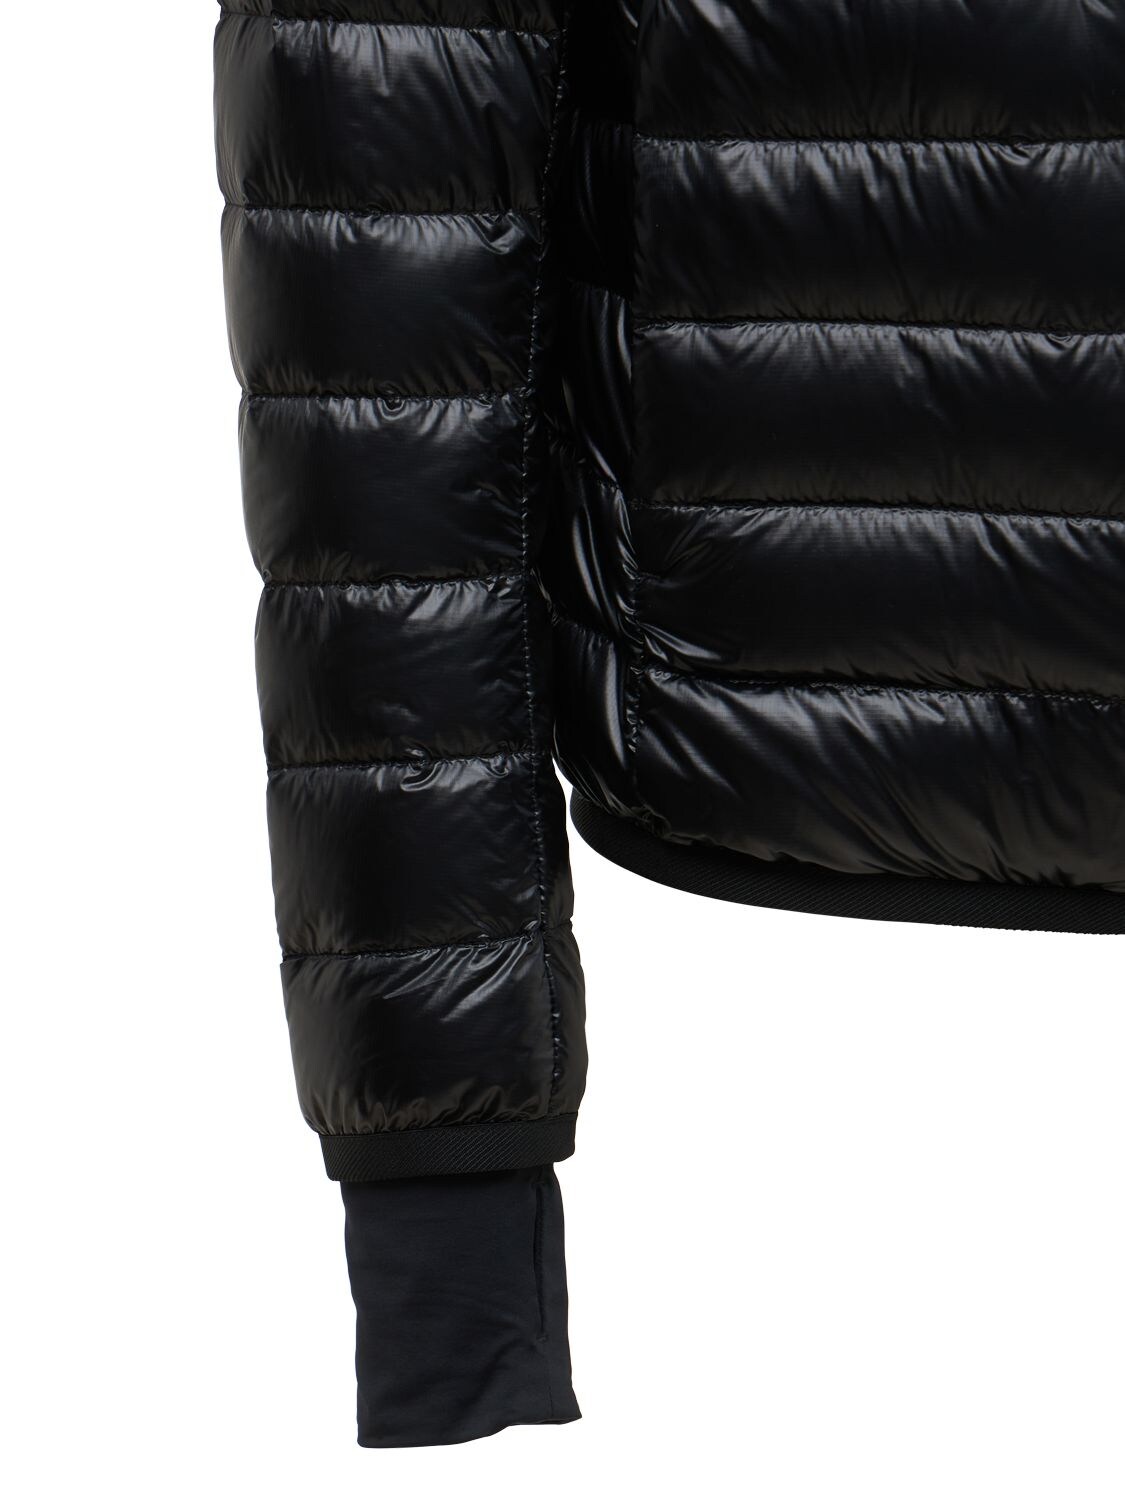 Day Namic Hers Ripstop Down Jacket in Black - Moncler Grenoble